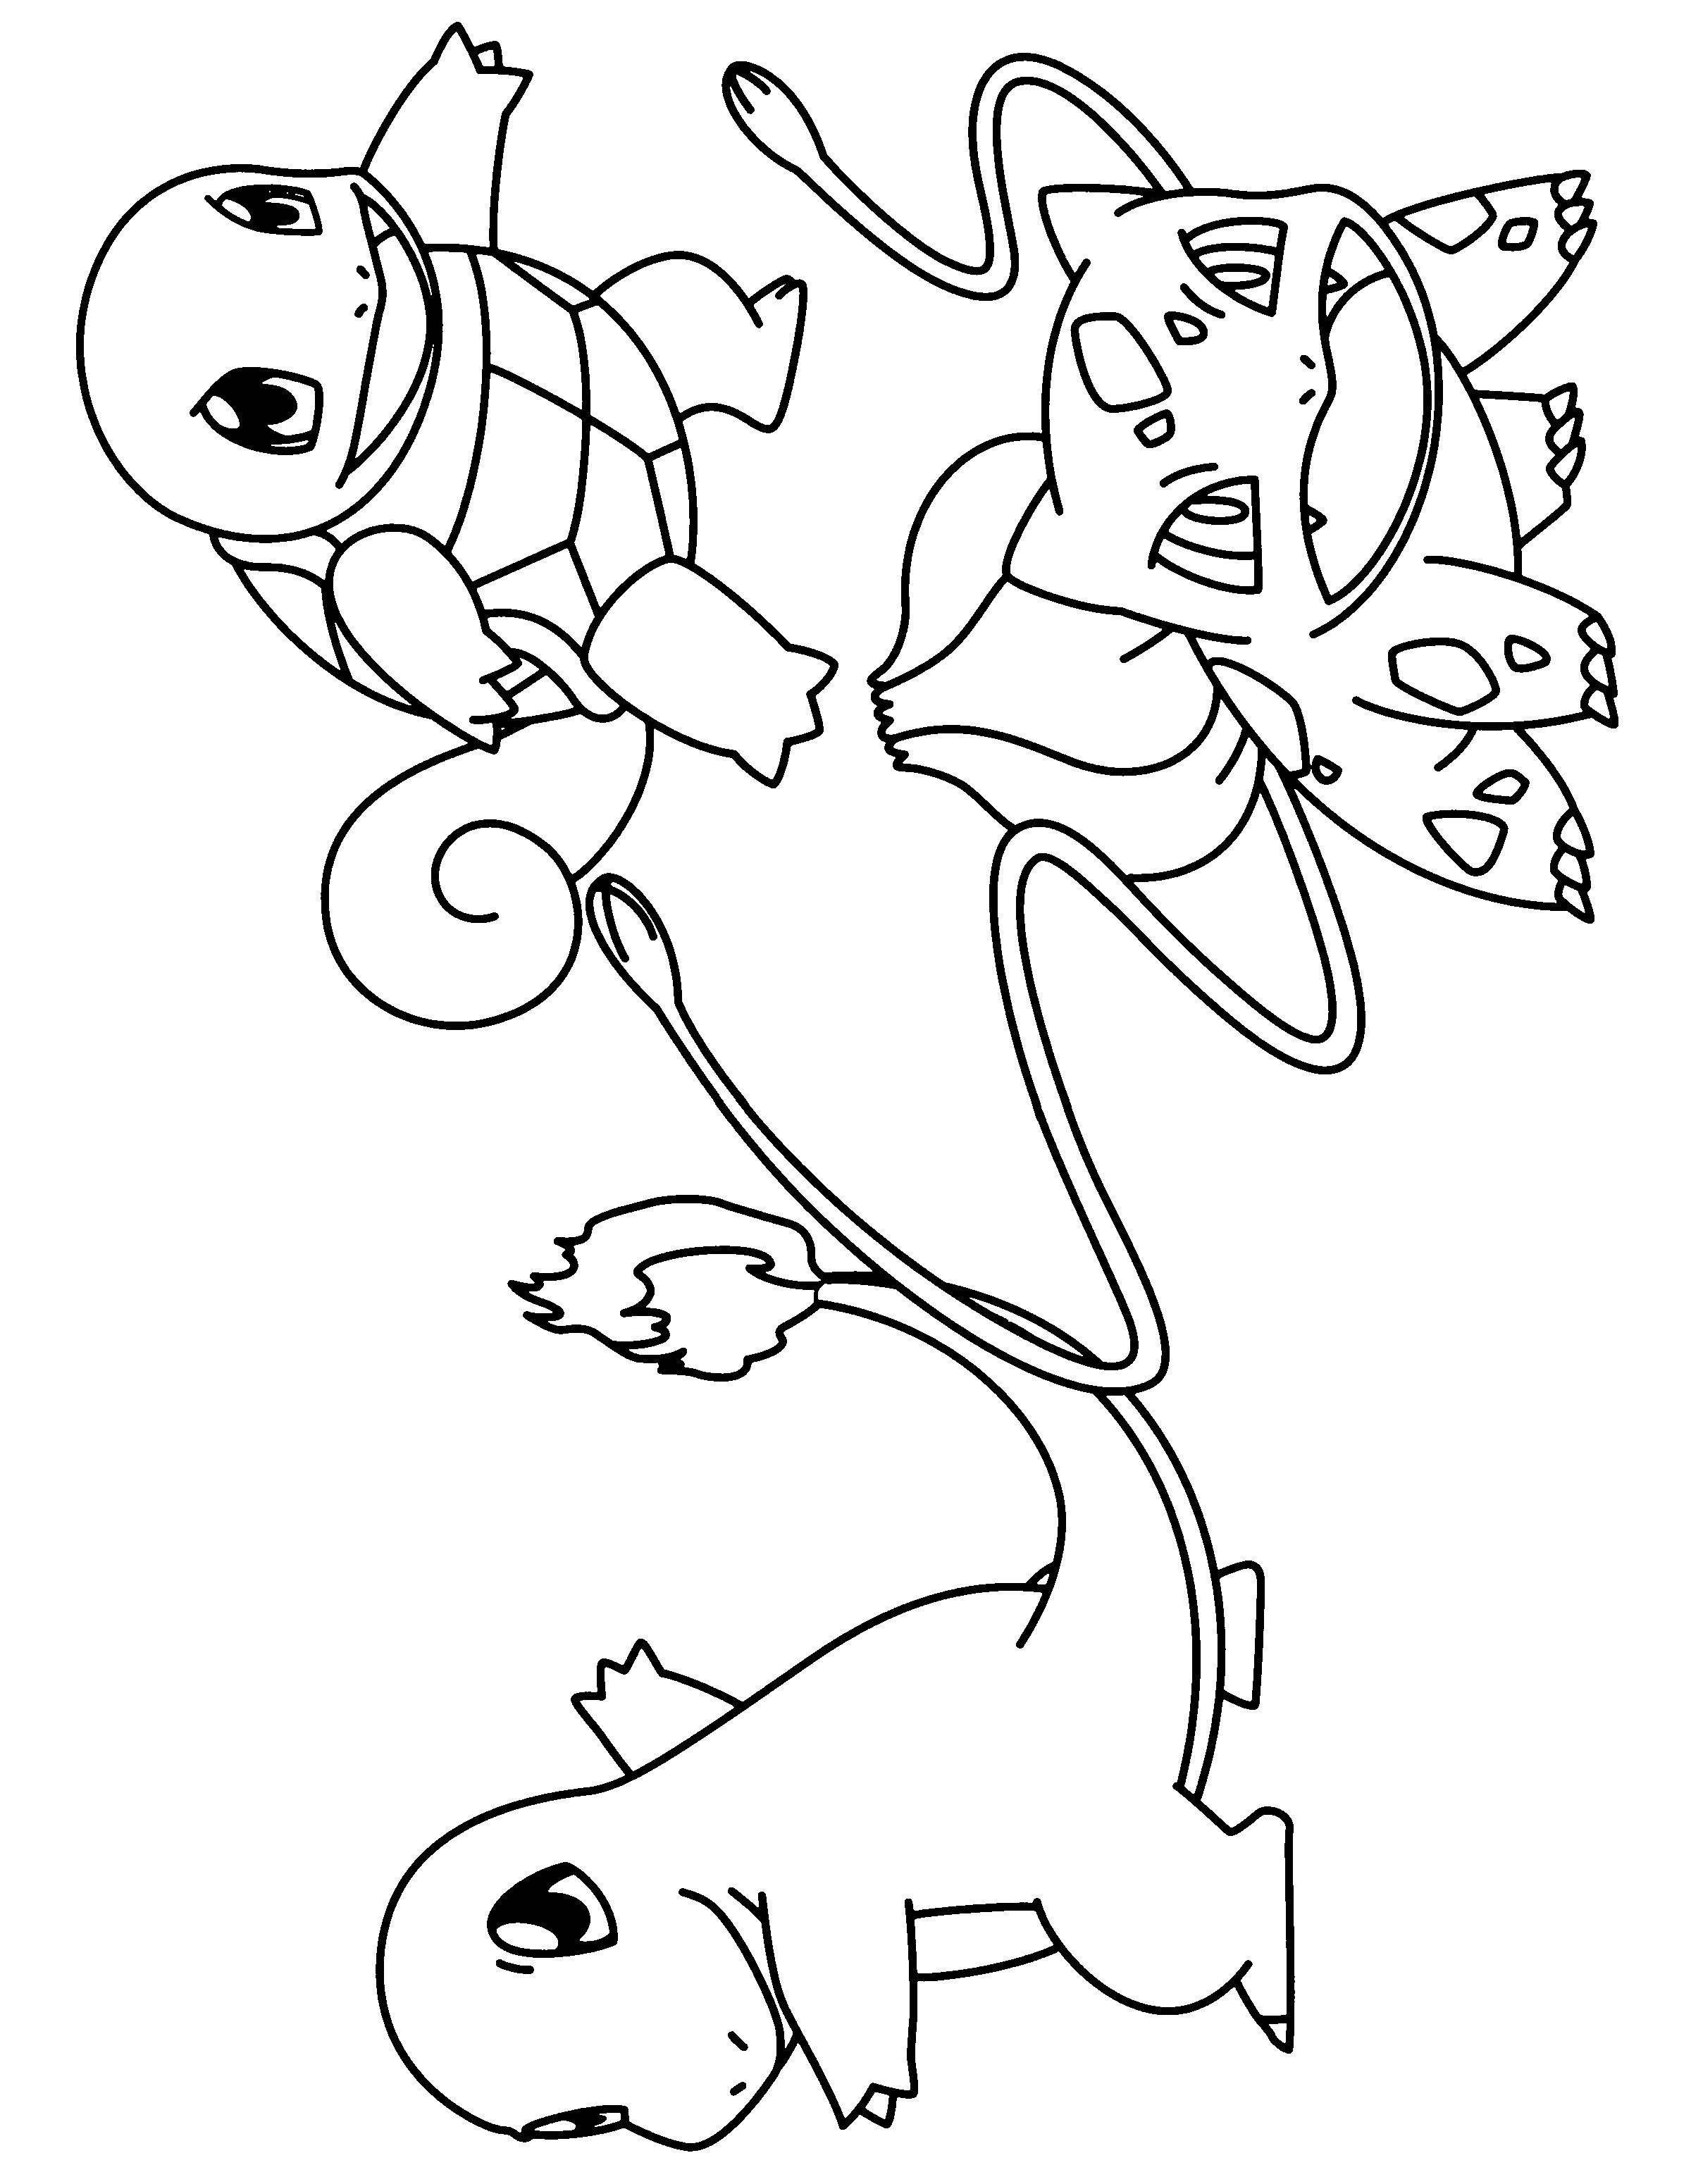 Bulbasaur Coloring Pages
 Bulbasaur Coloring Page Coloring Home